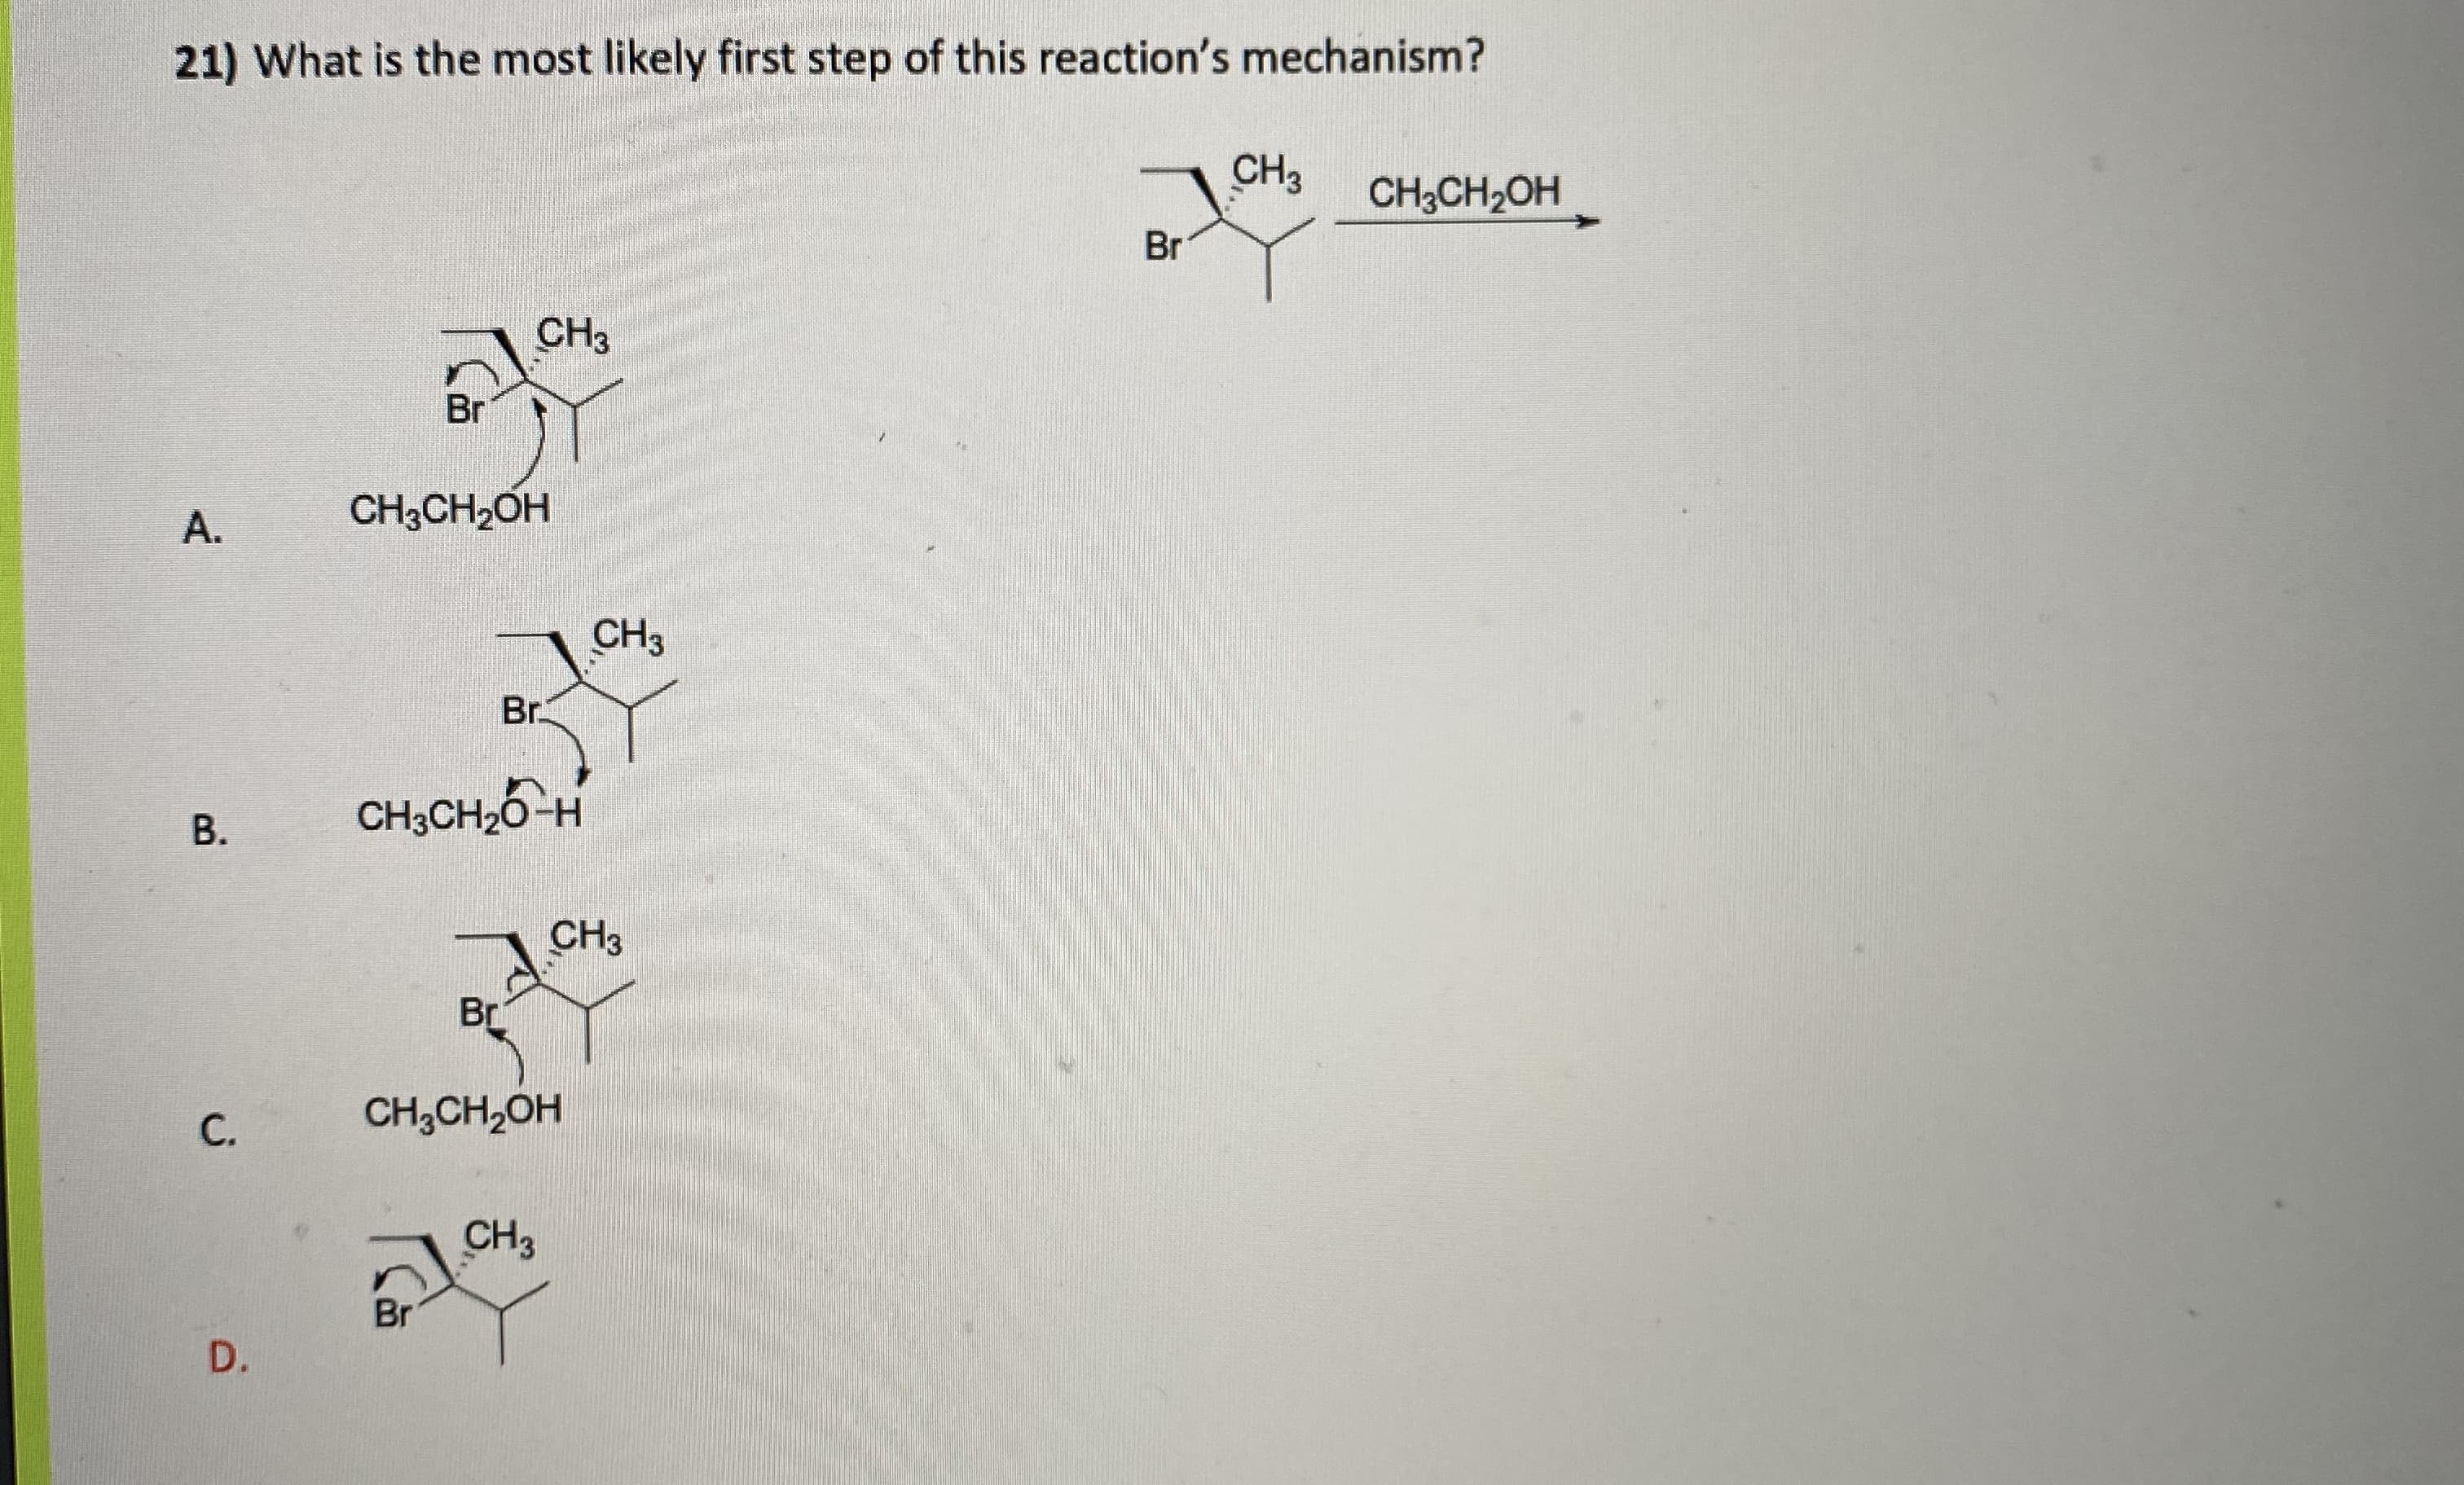 What is the most likely first step of this reaction's mechanism?
CH3
CH;CH2OH
Br
